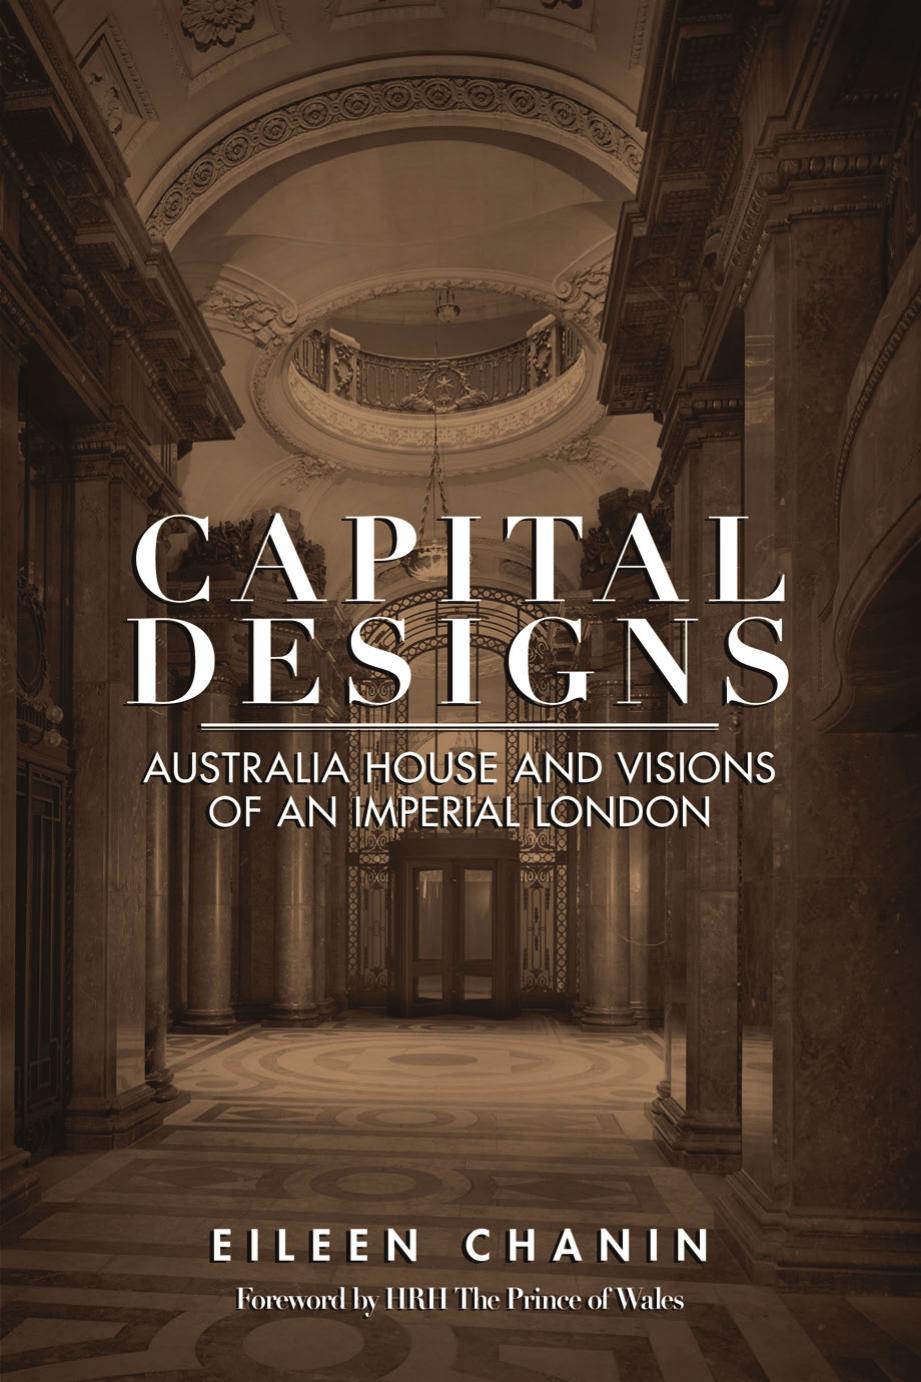 Capital Designs : Australia House and Visions of an Imperial London by Eileen Chanin